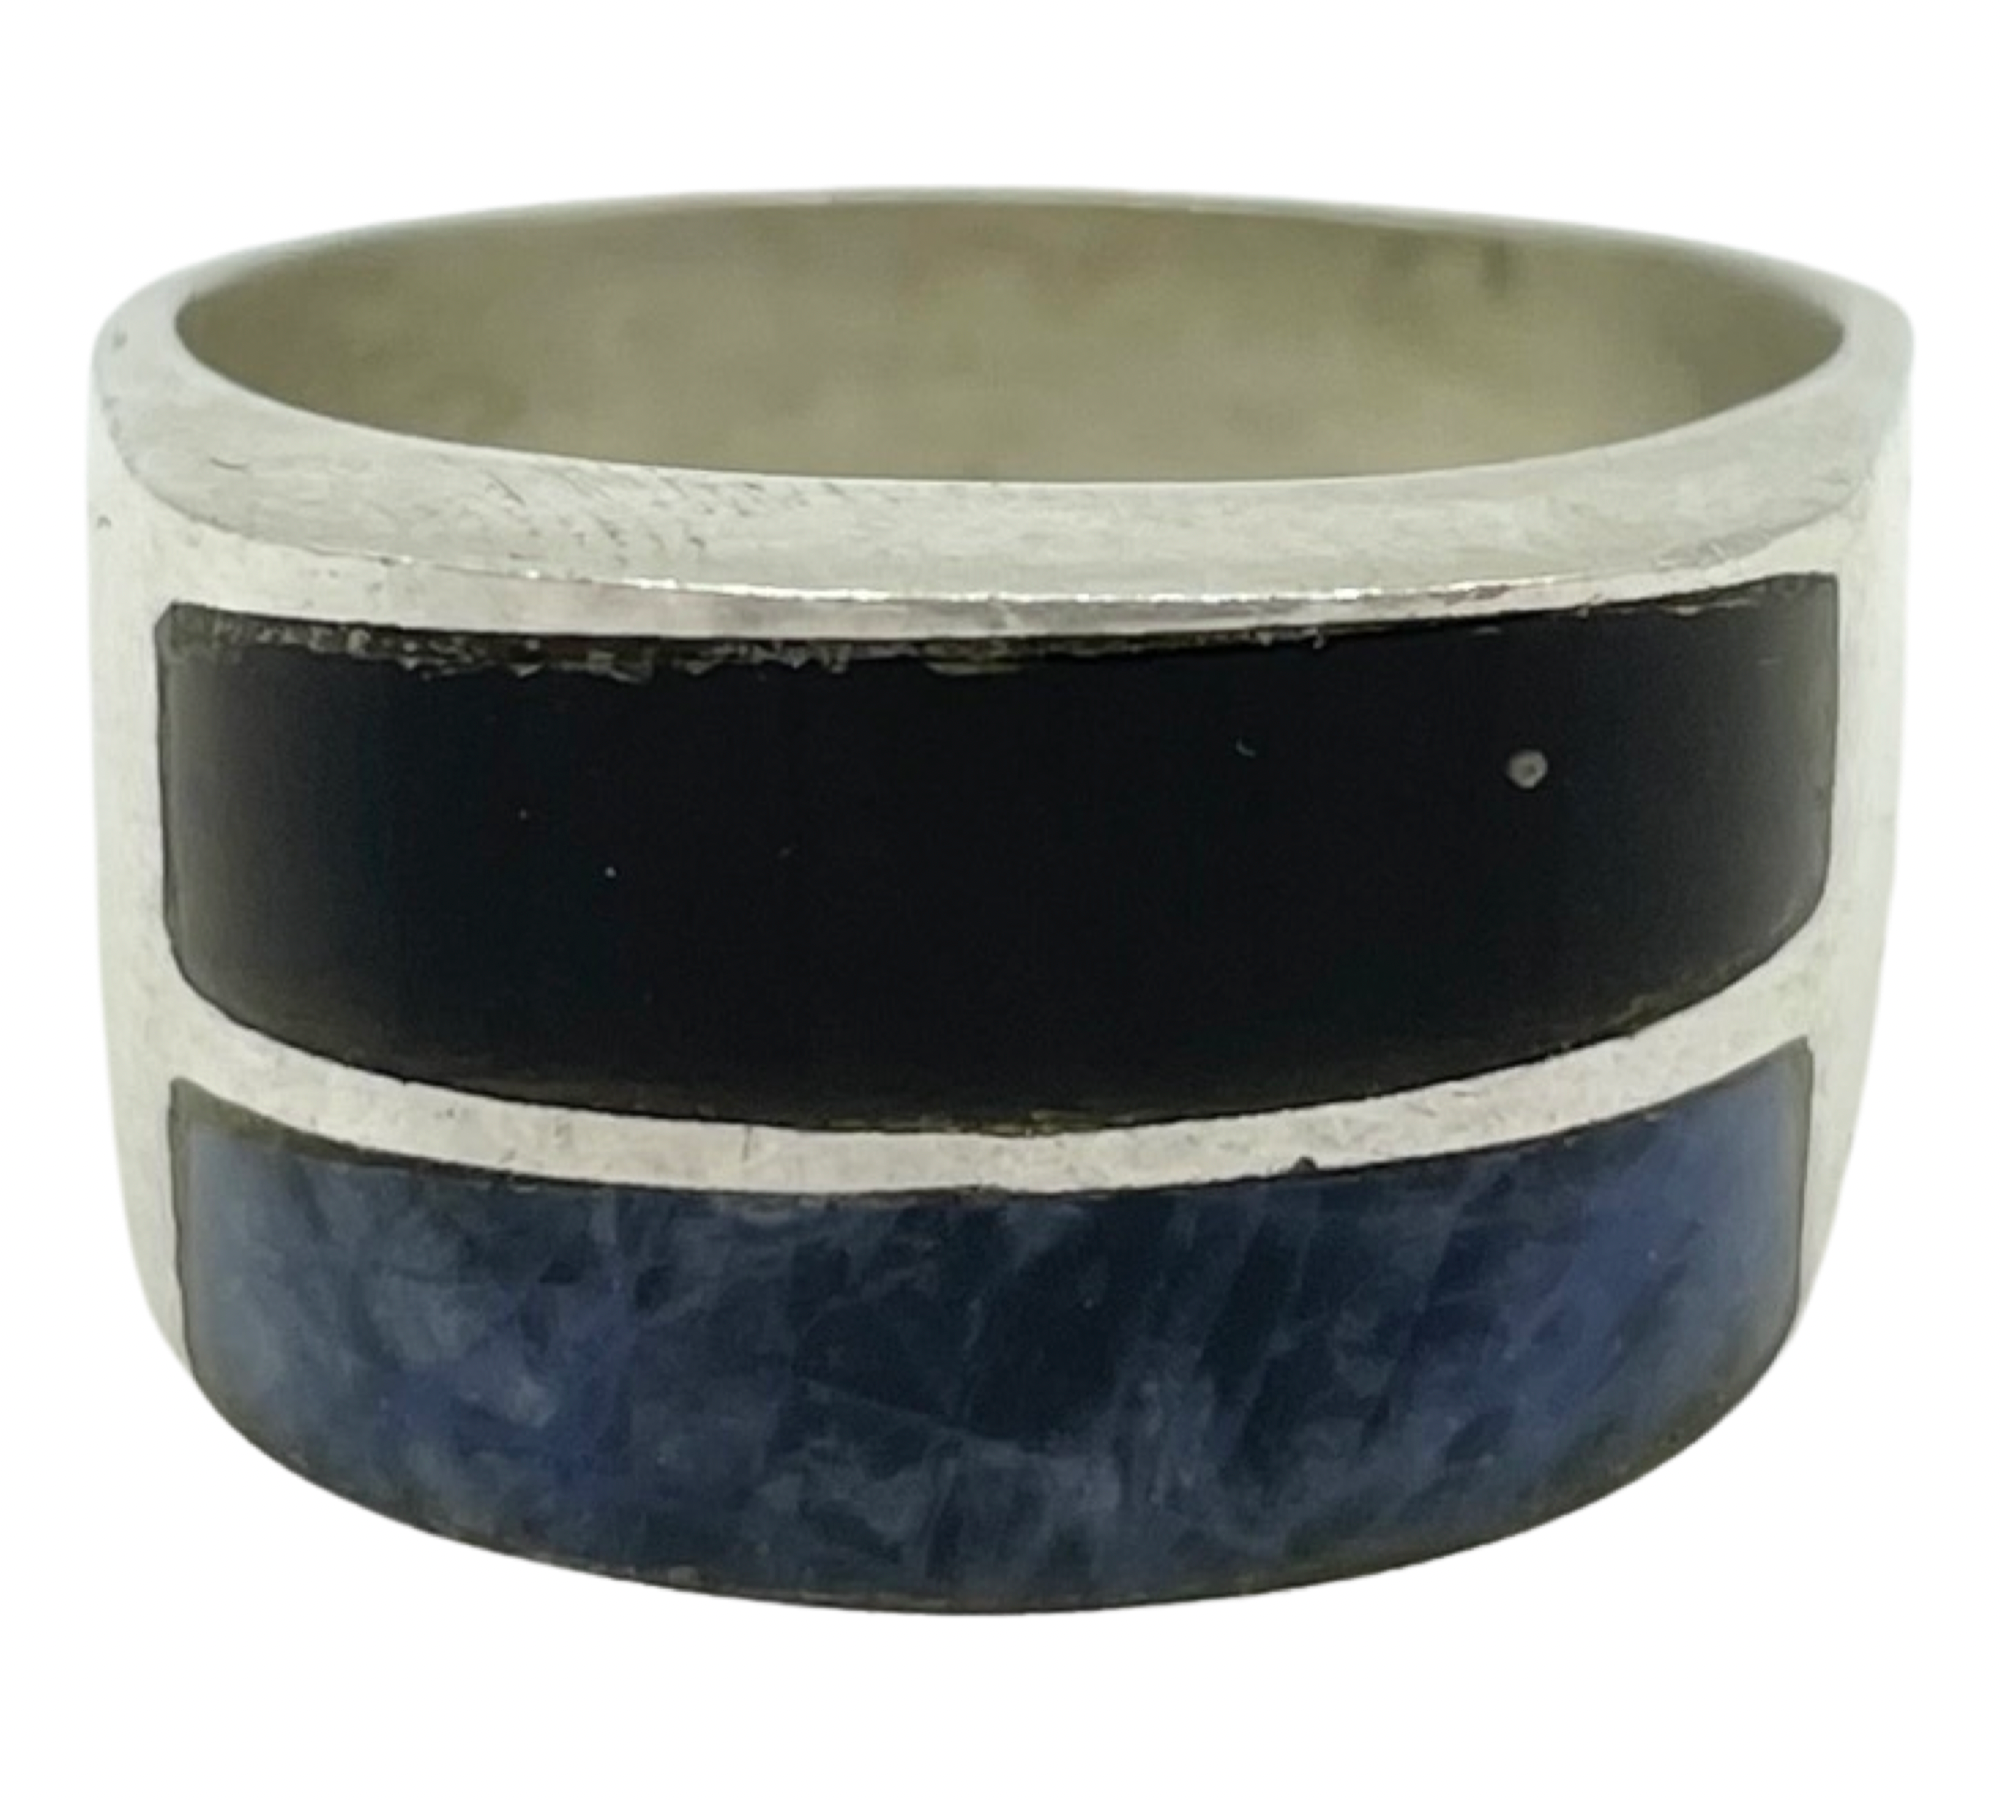 size 9.25 sterling silver chunky sodalite and gold flake obsidian(?) ring